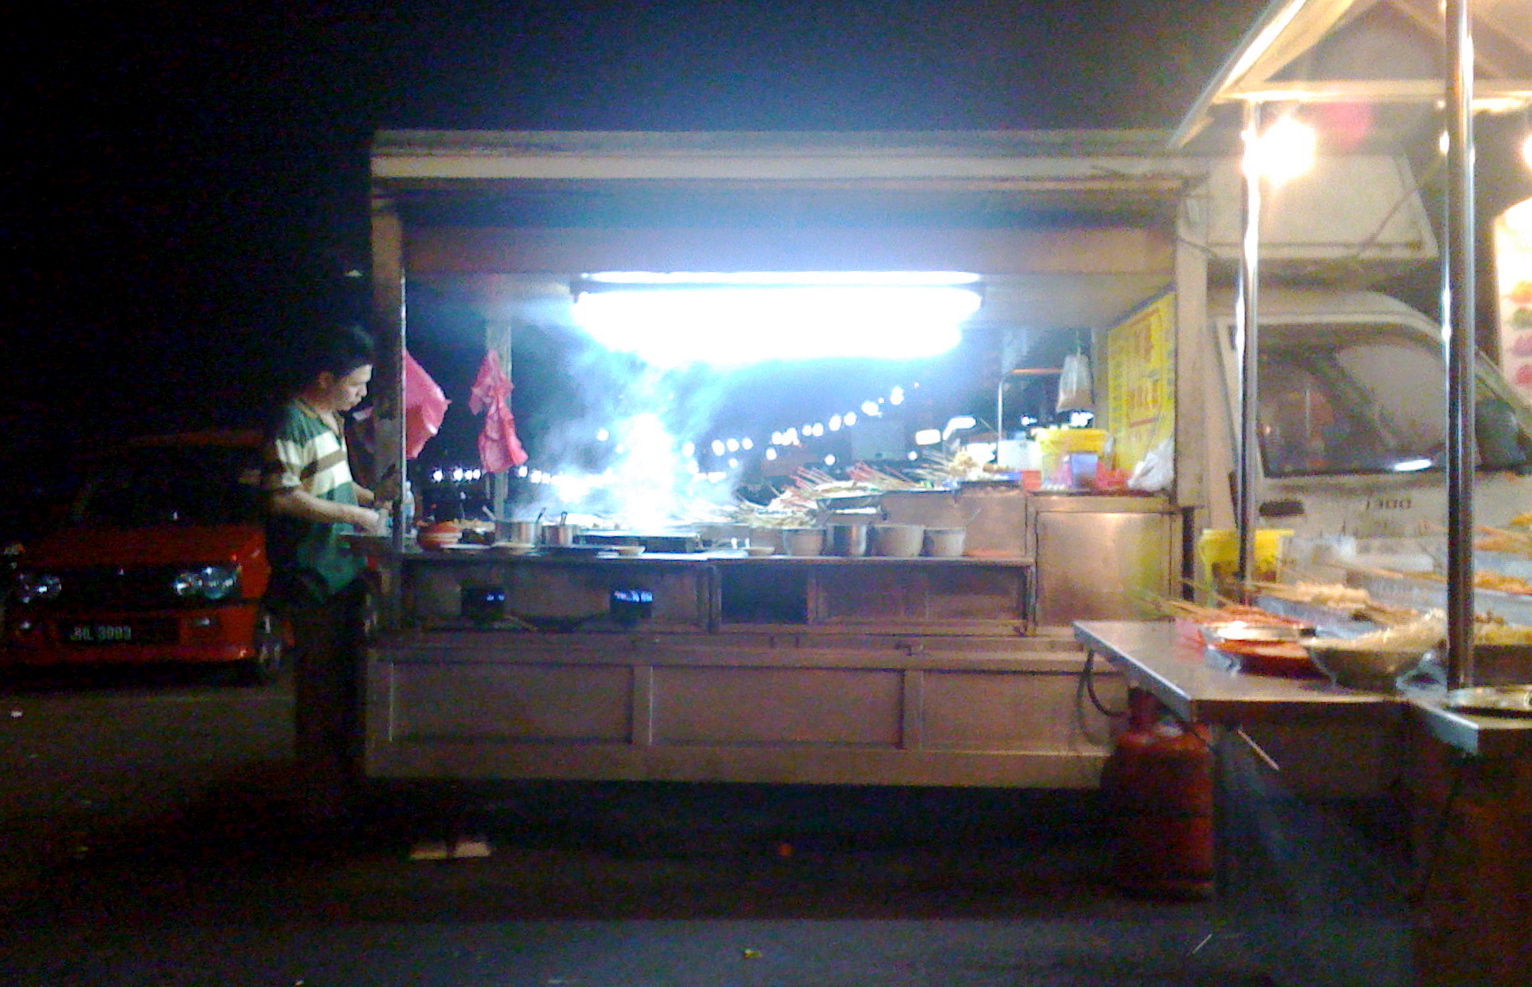 there is a man cooking food in a stand